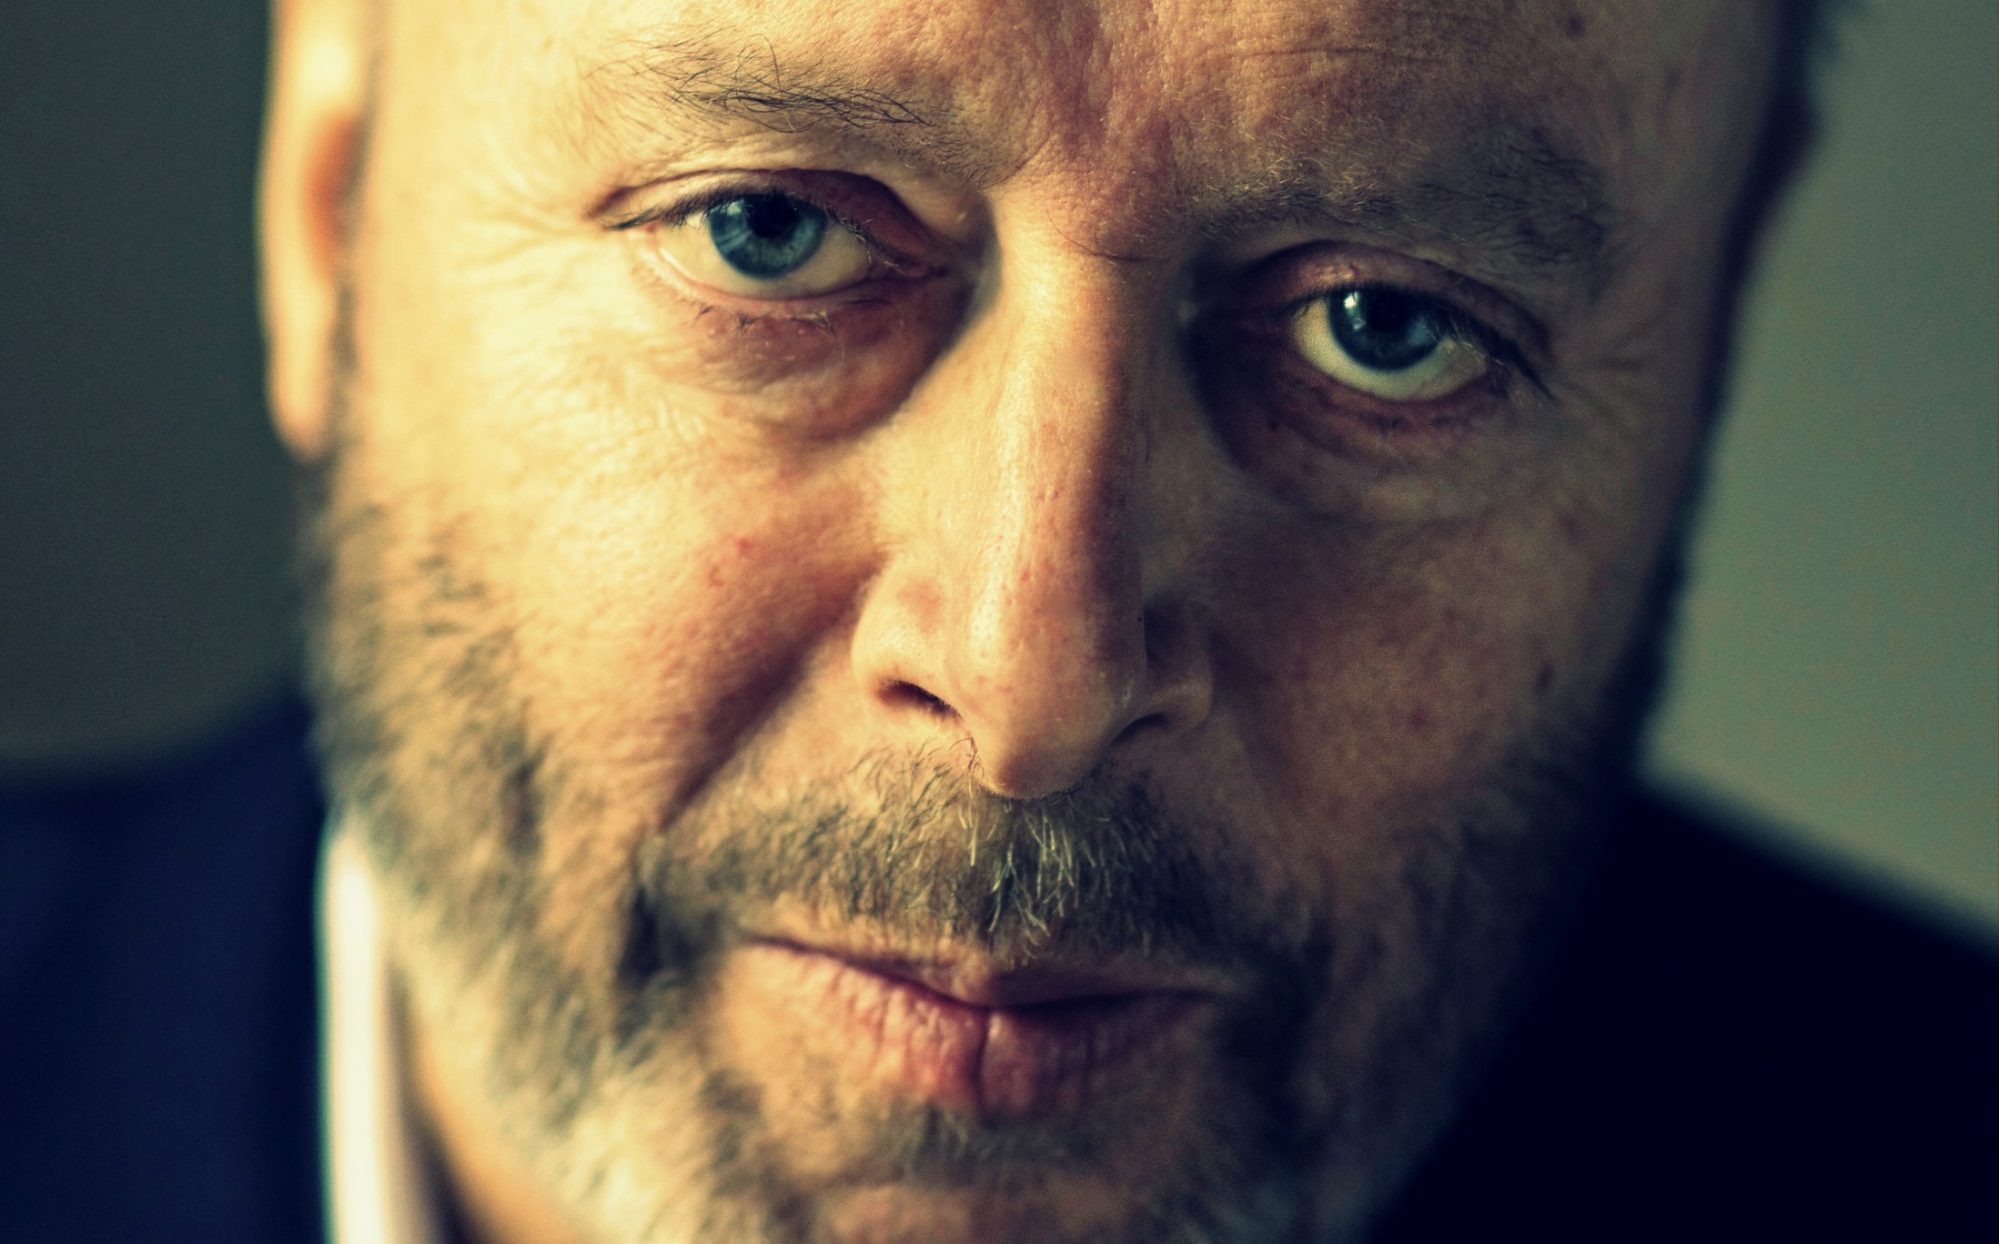 Christopher Hitchens in his own voice